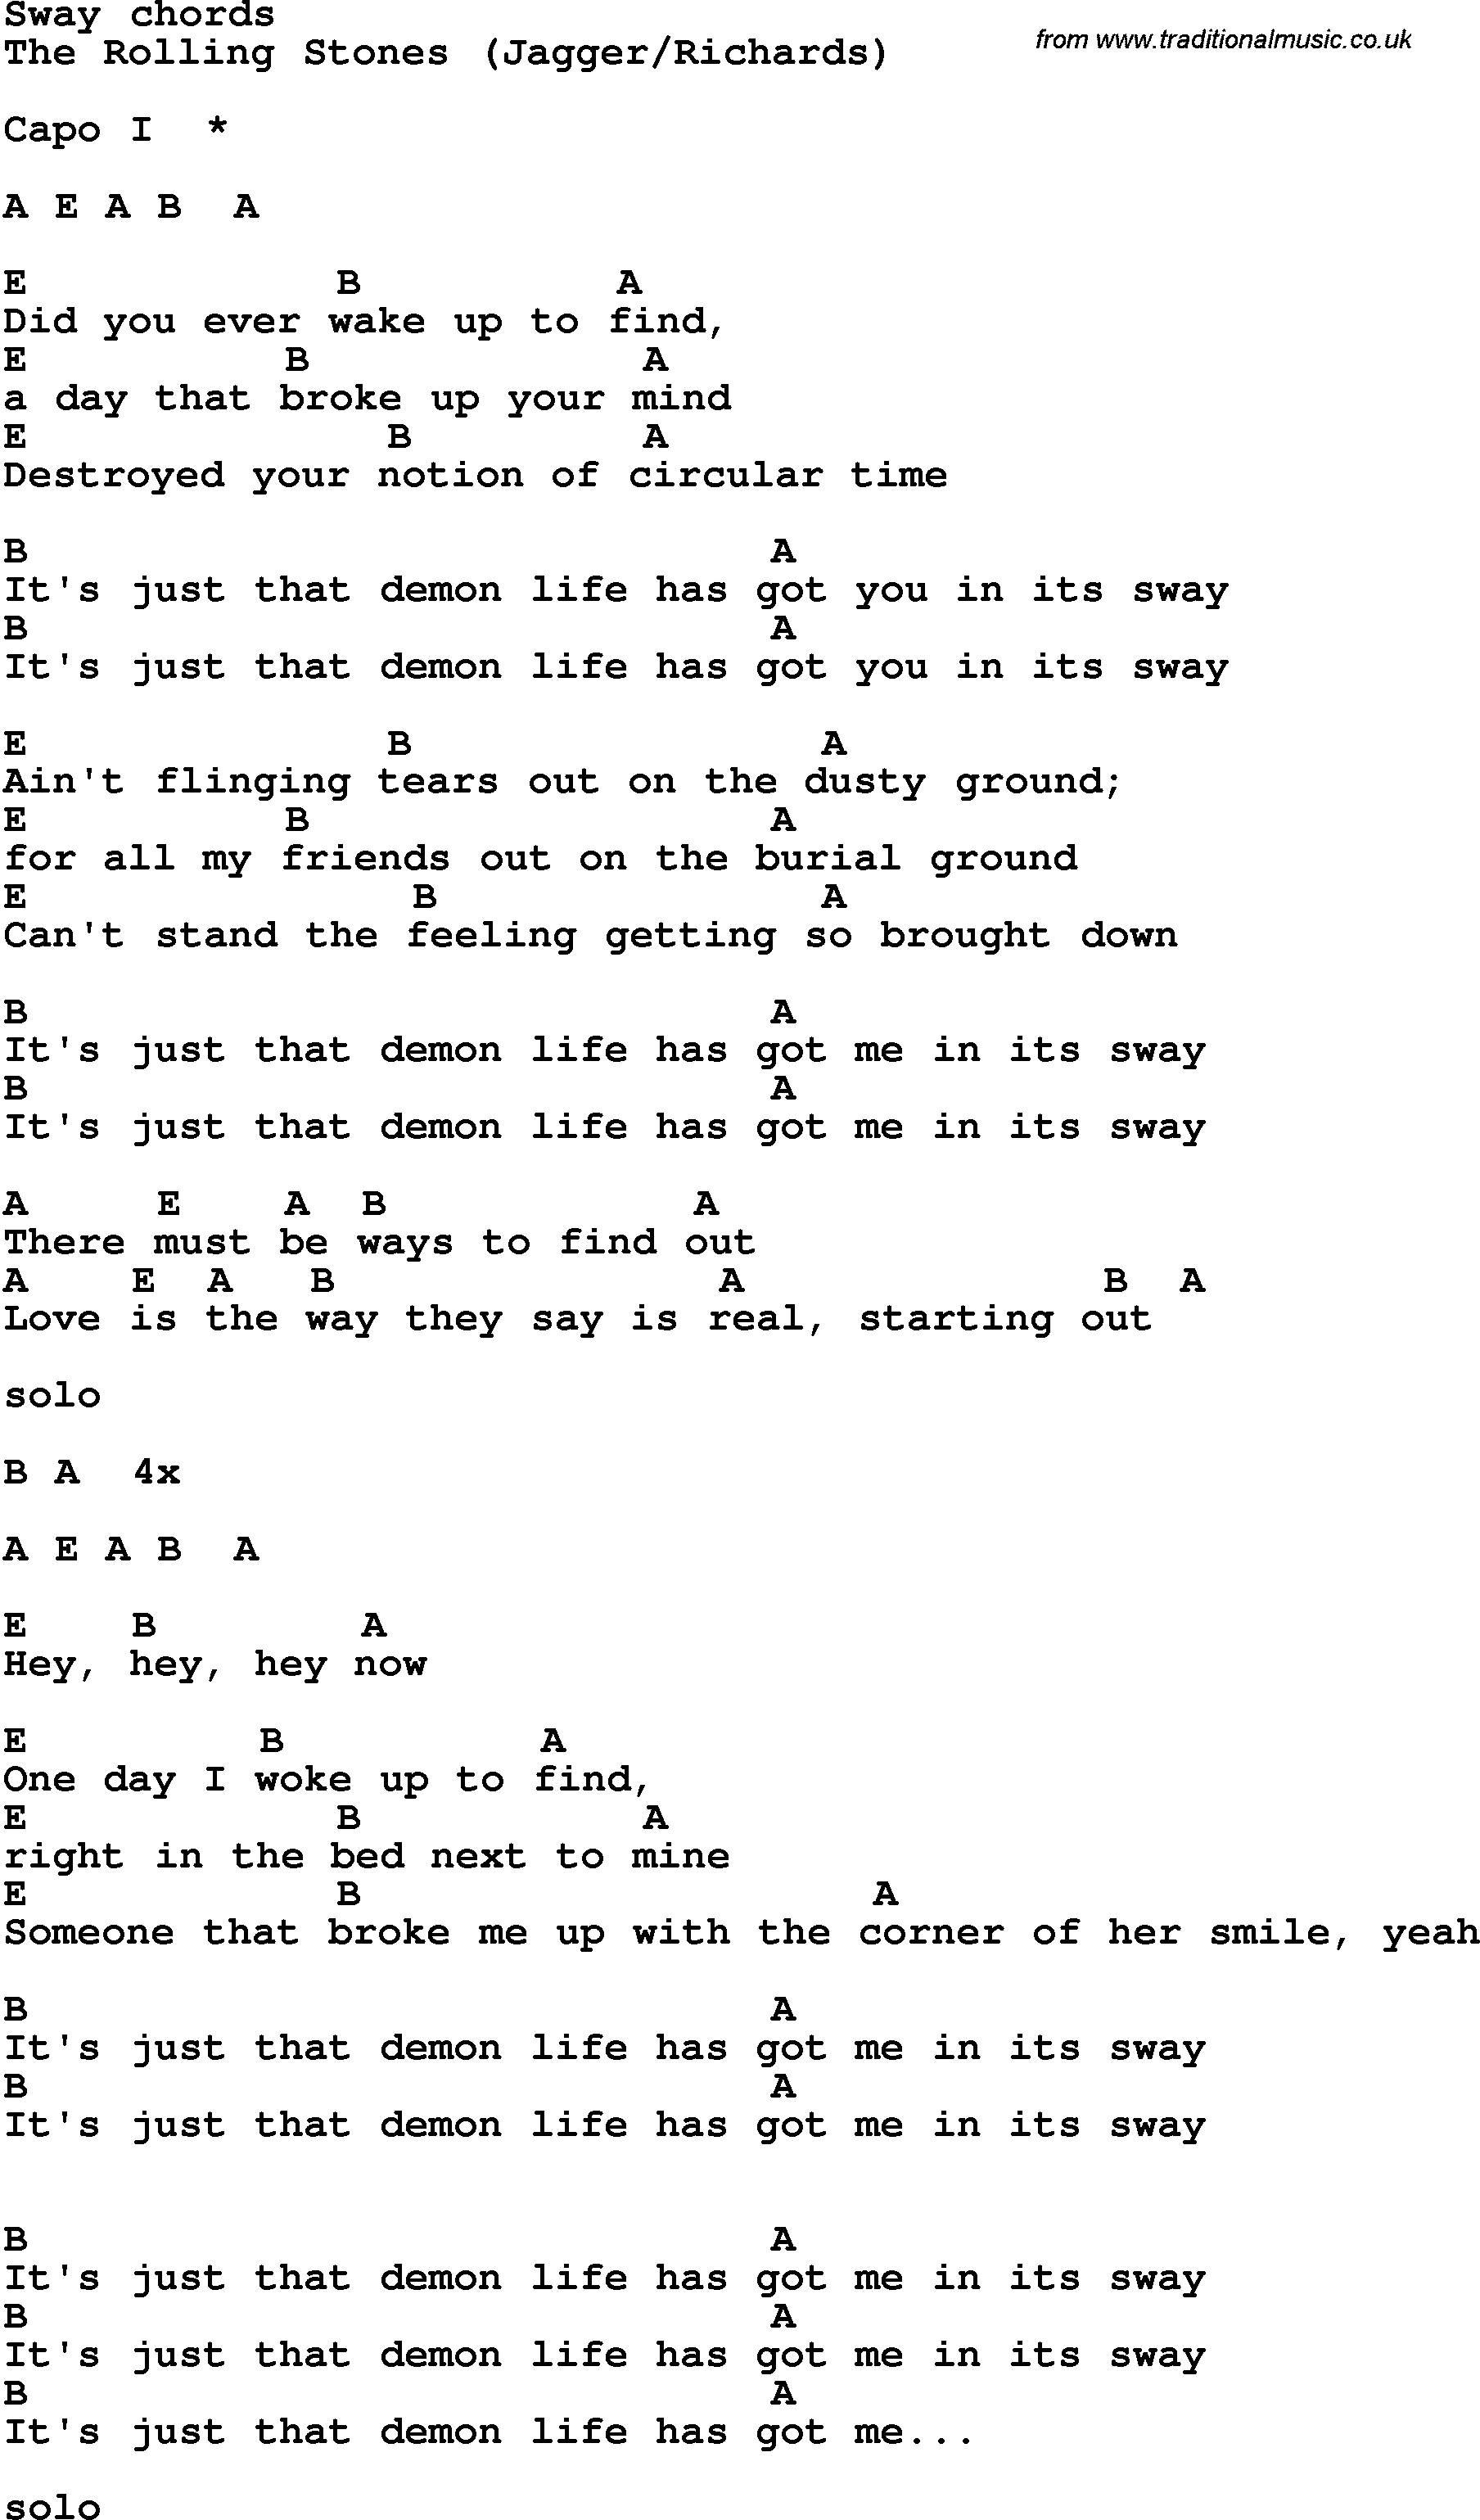 Song Lyrics with guitar chords for Sway